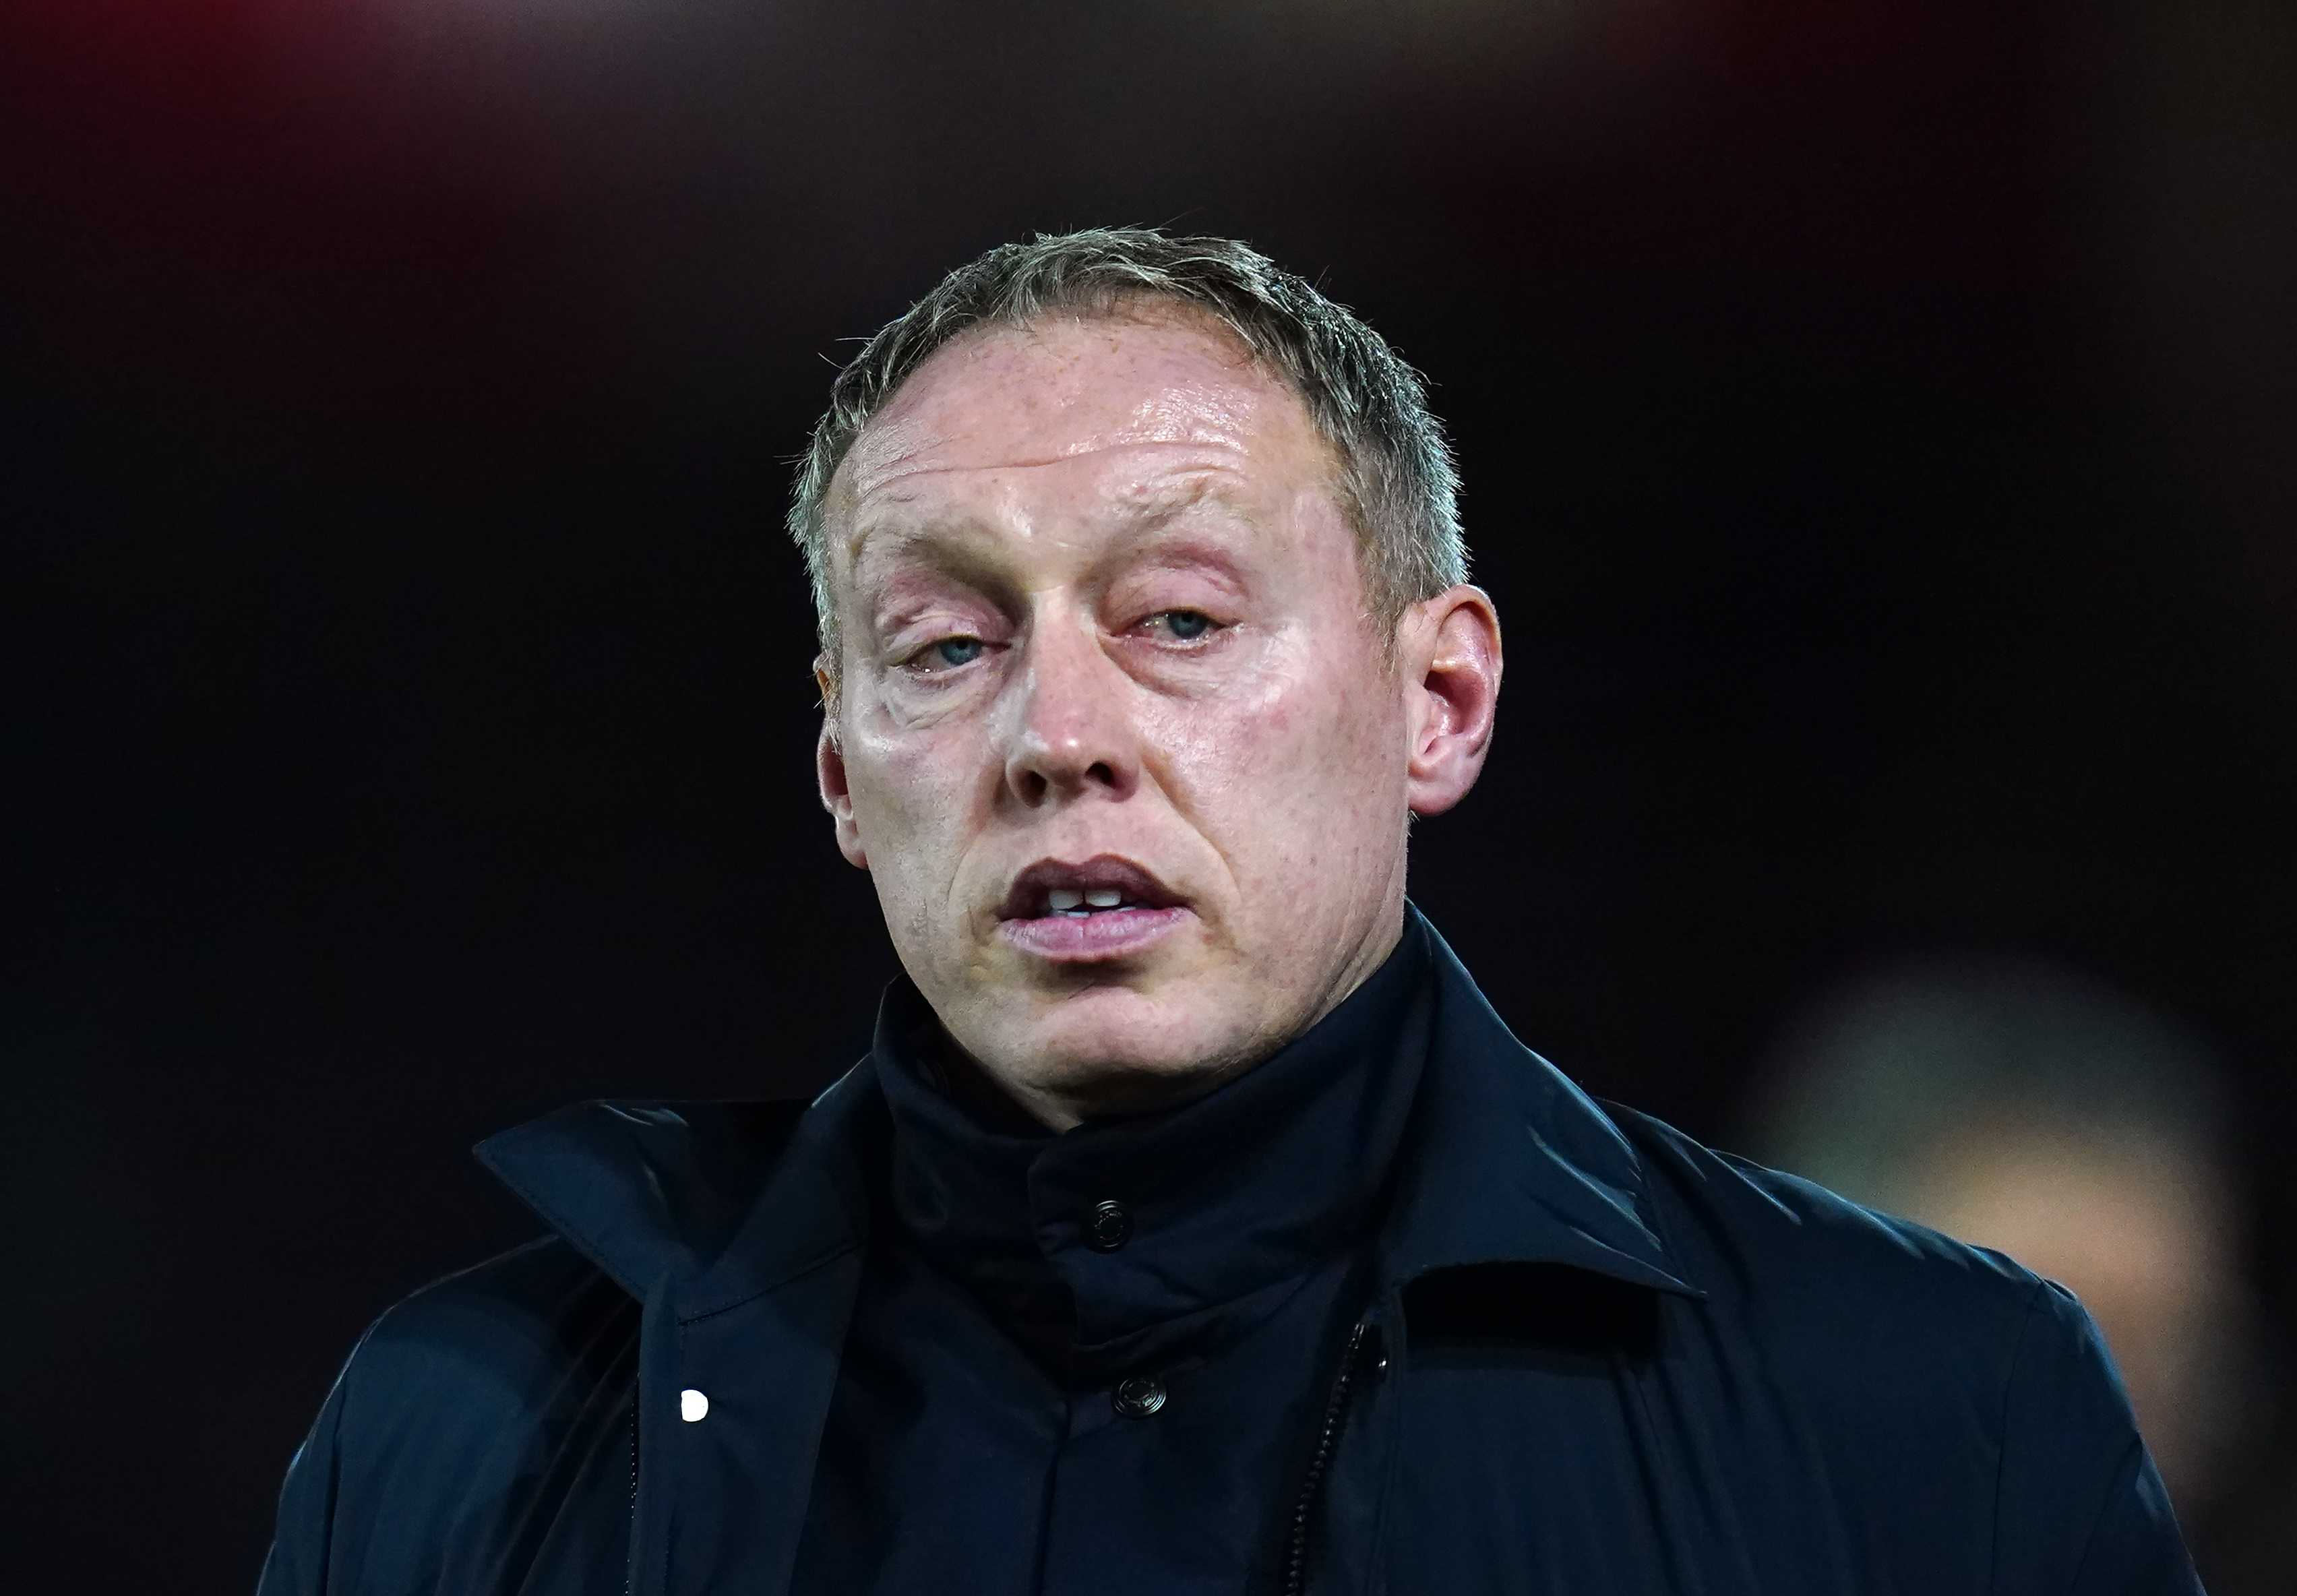 Steve Cooper's time at Nottingham Forest appears to be coming to an end